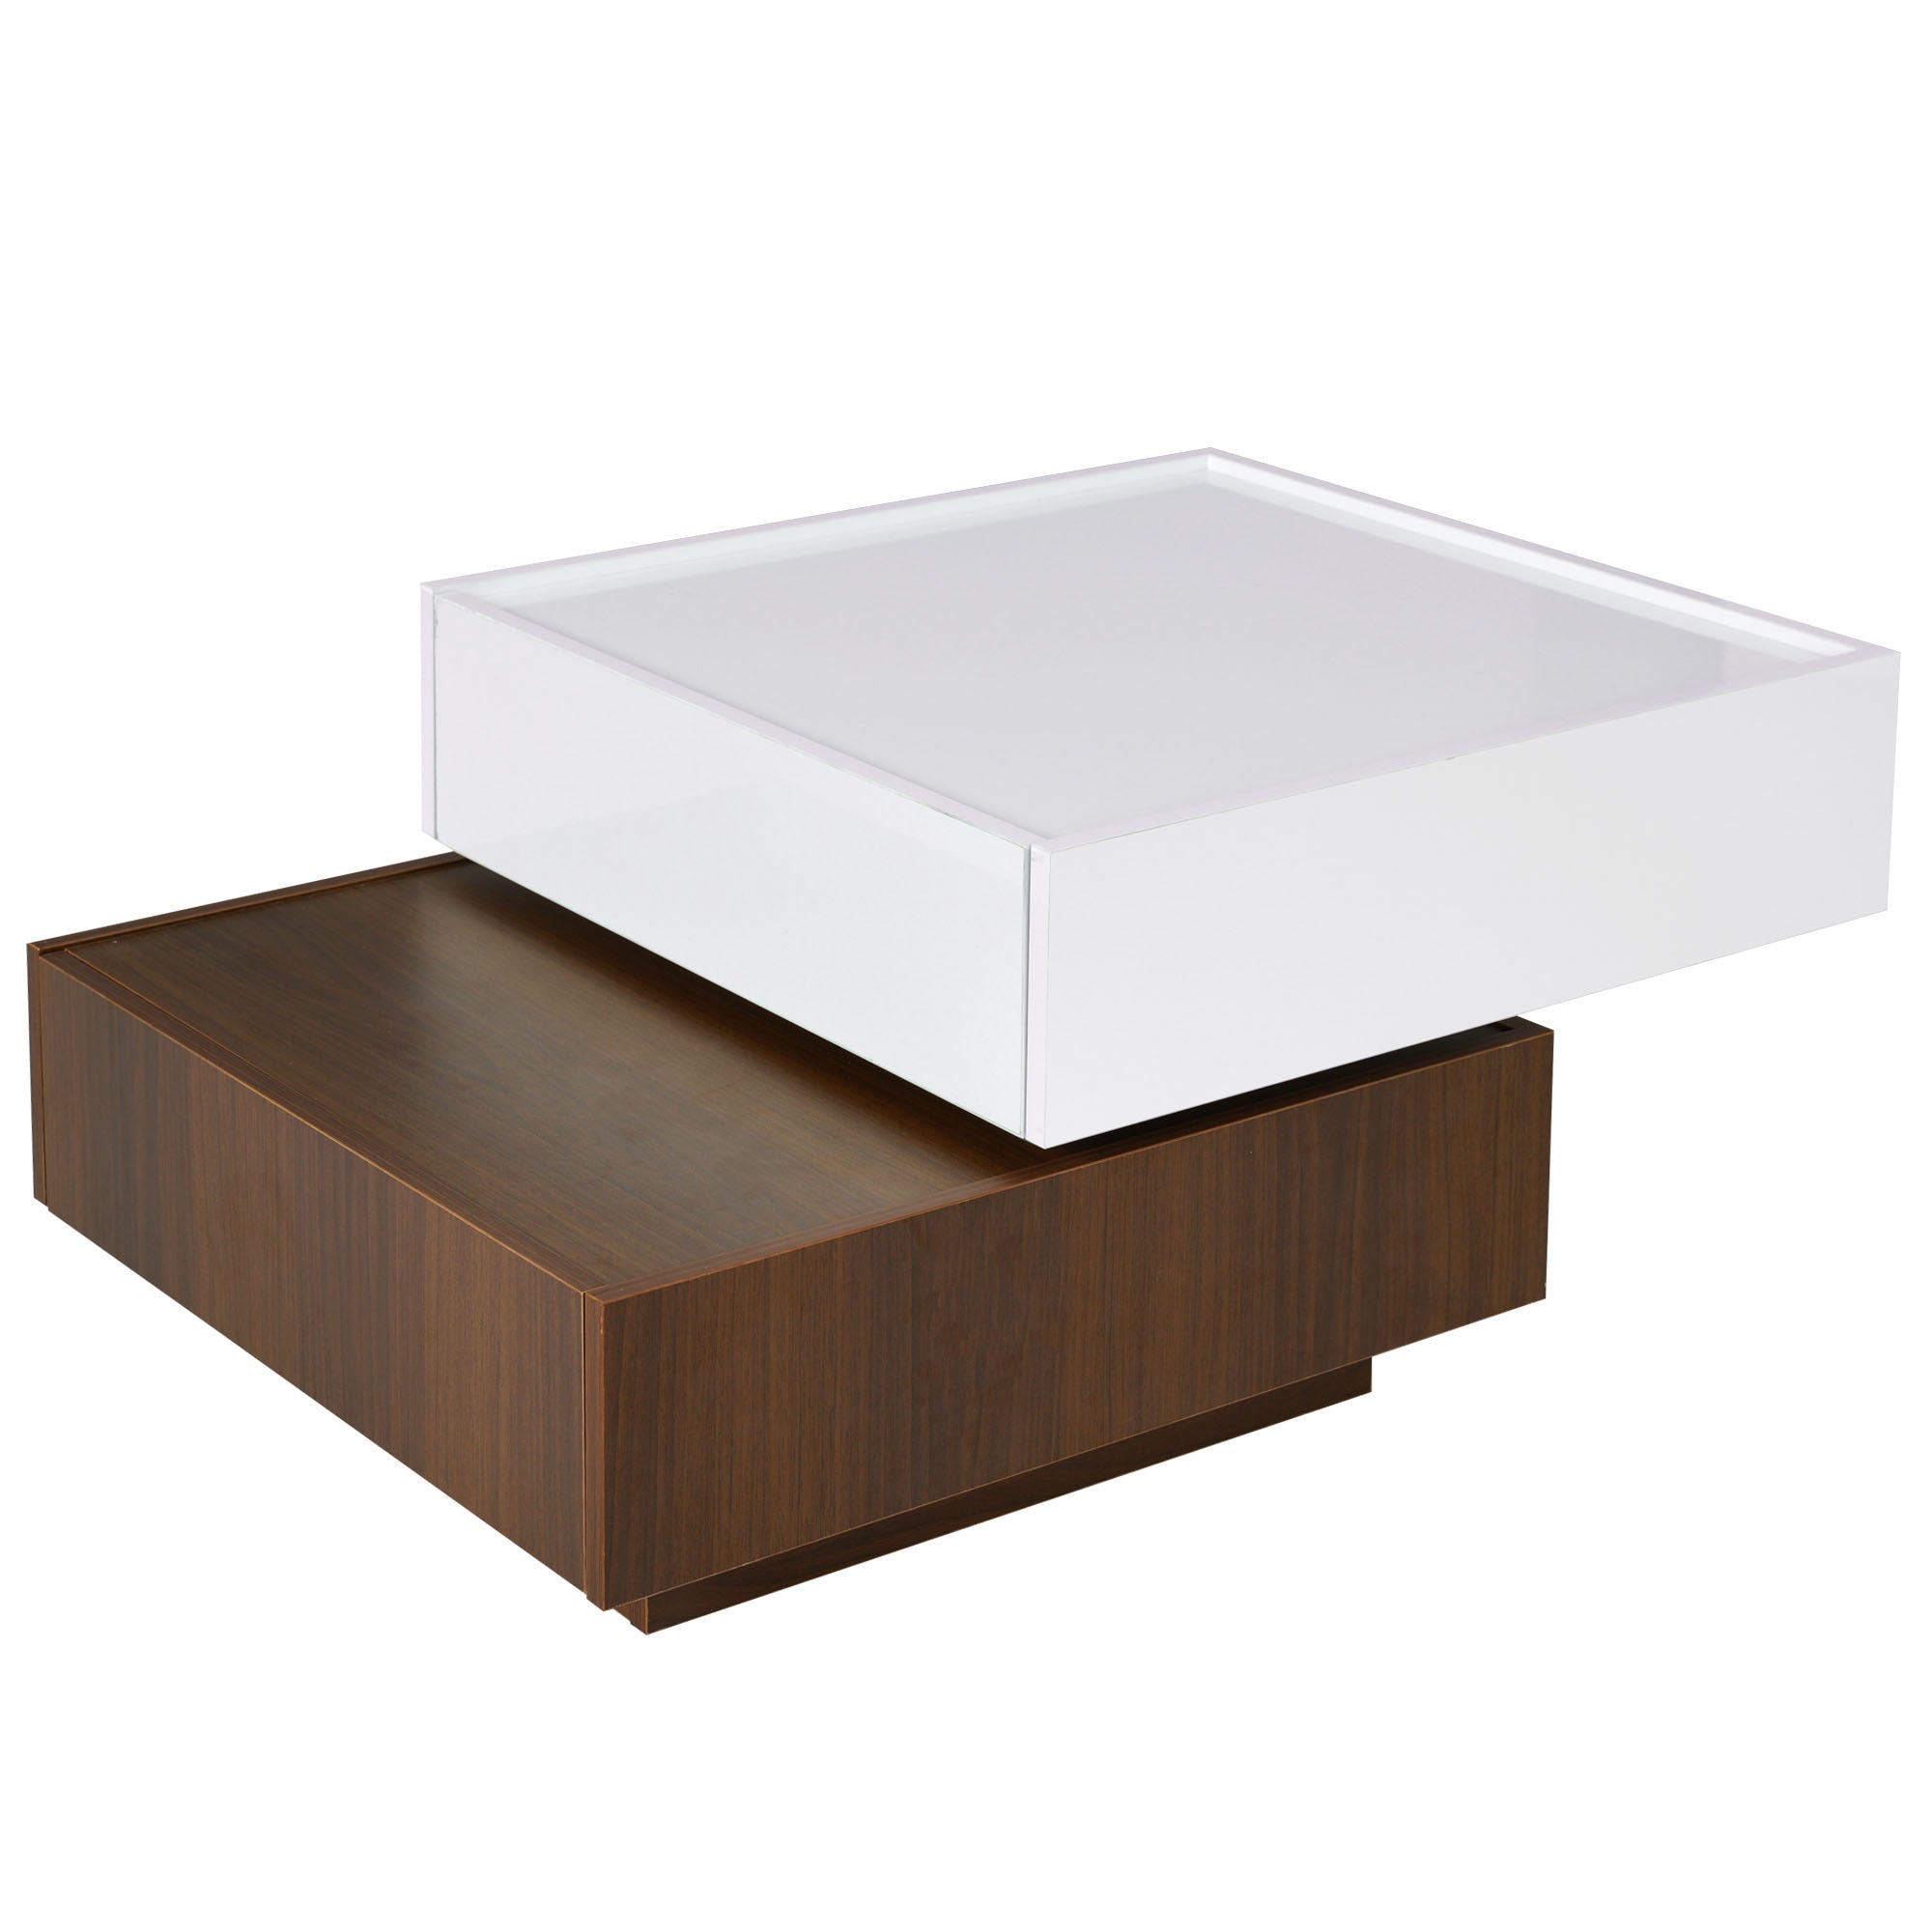 ON TREND Multi functional Square 360 Rotating Coffee white+walnut-primary living